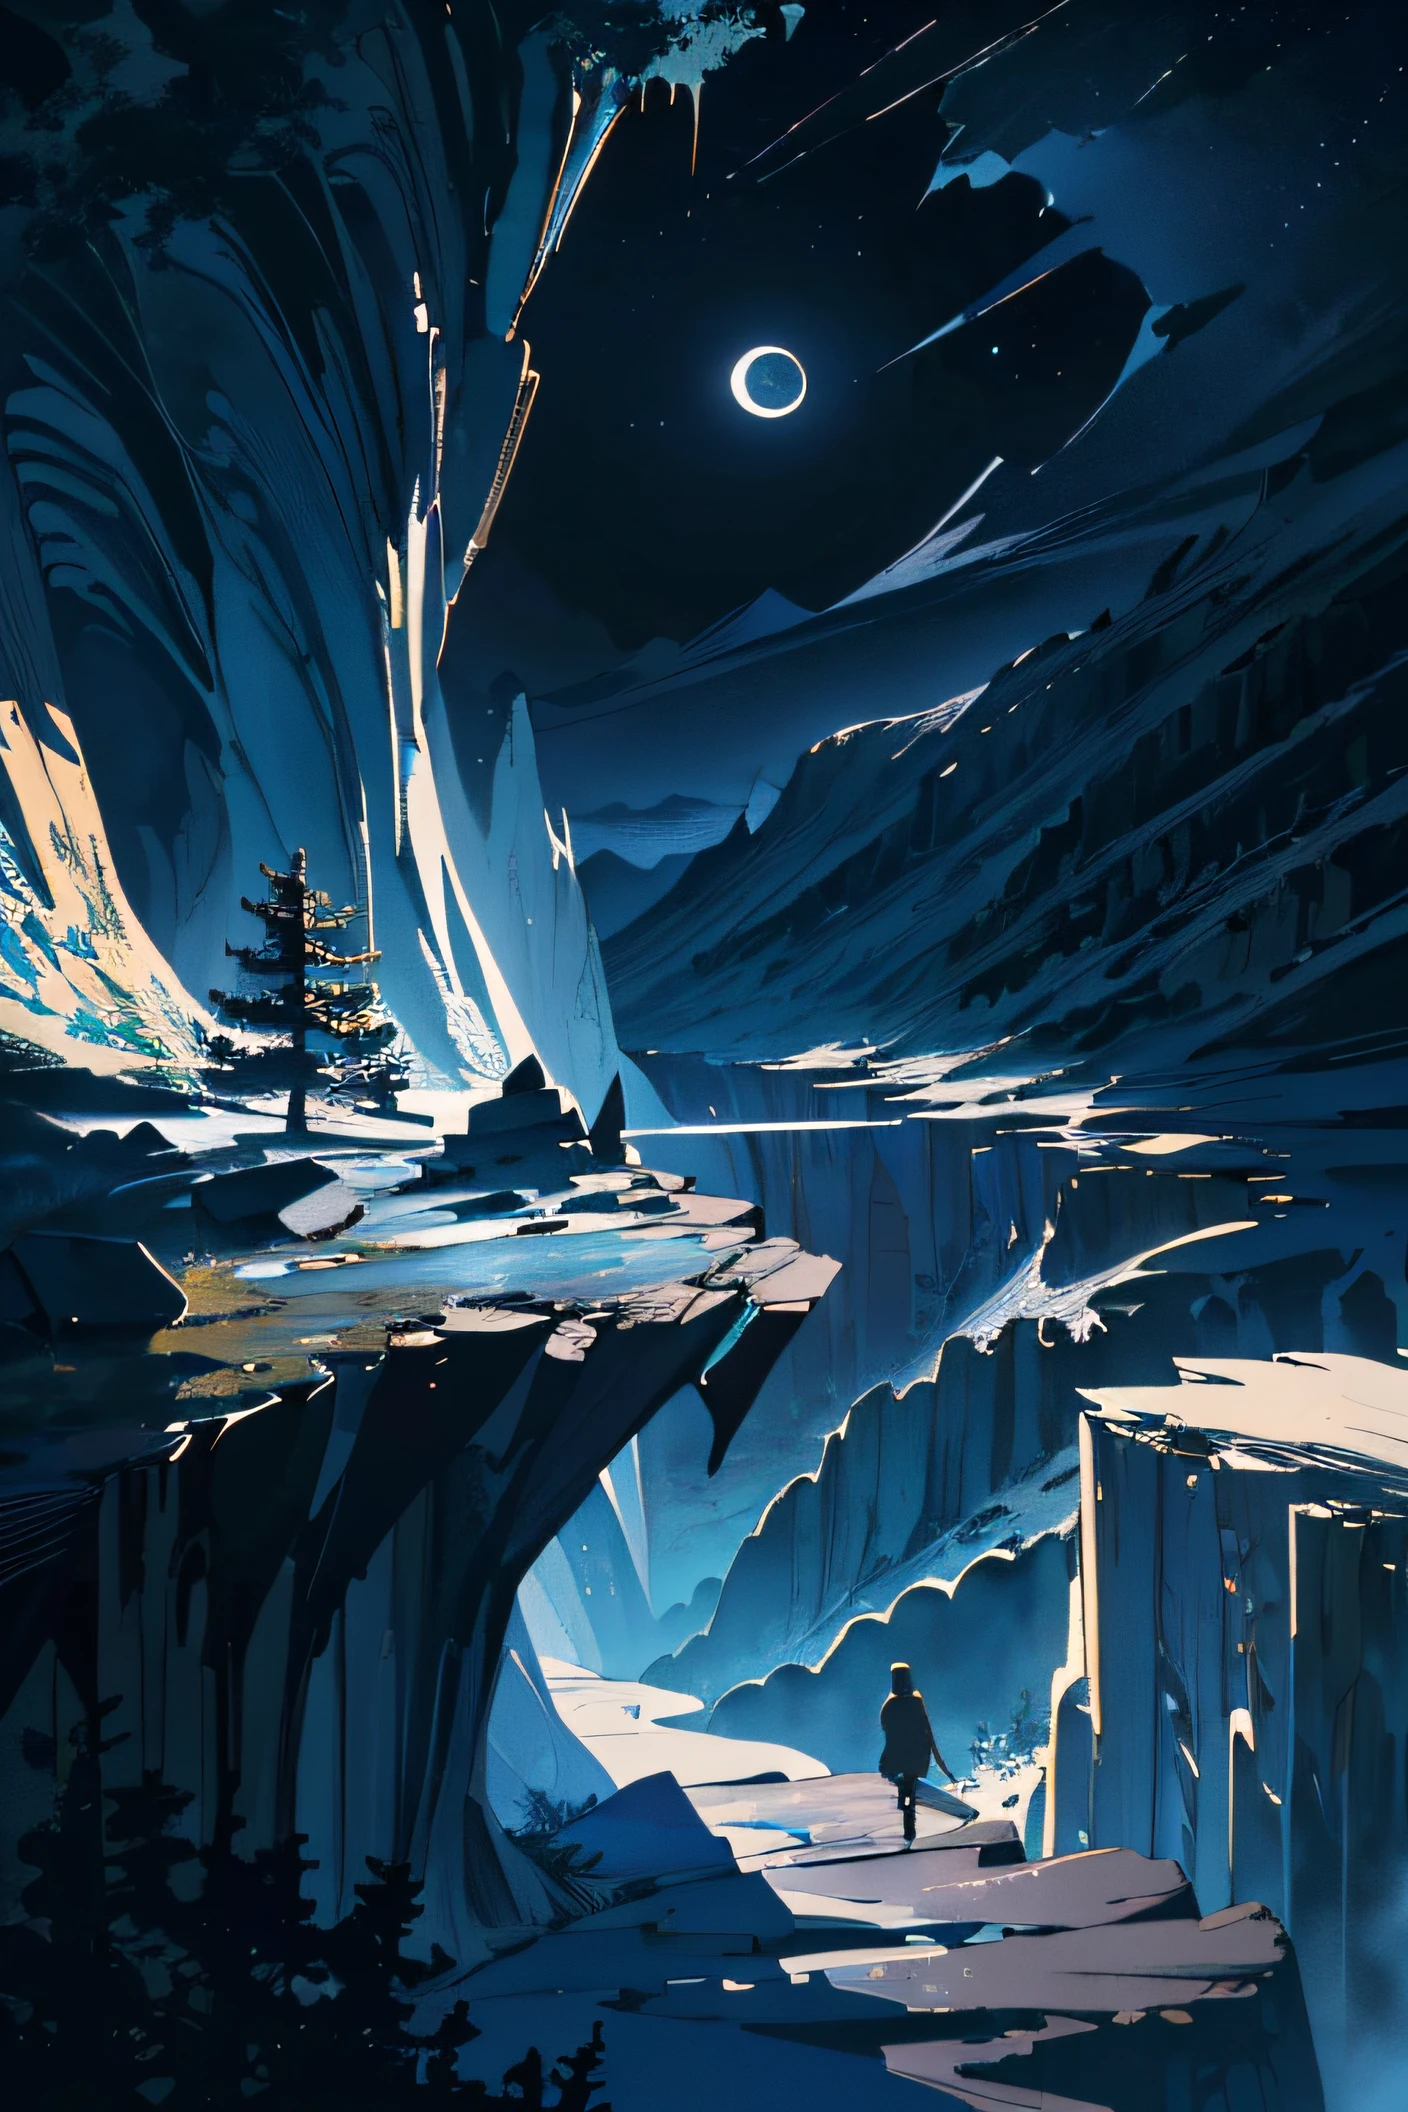 Very good 8KCG wallpapers, very fine 8K CG wallpaper, watercolor (medium), (((dark, Dark Night, Deep Night, the moon))) ((Sky color: dark blue)) (((Natural Background, rock formations, wood))), cliff, Mountain Summit ((plein air)) (((Character Deletion))) (((Excluding people))), Rough terrain